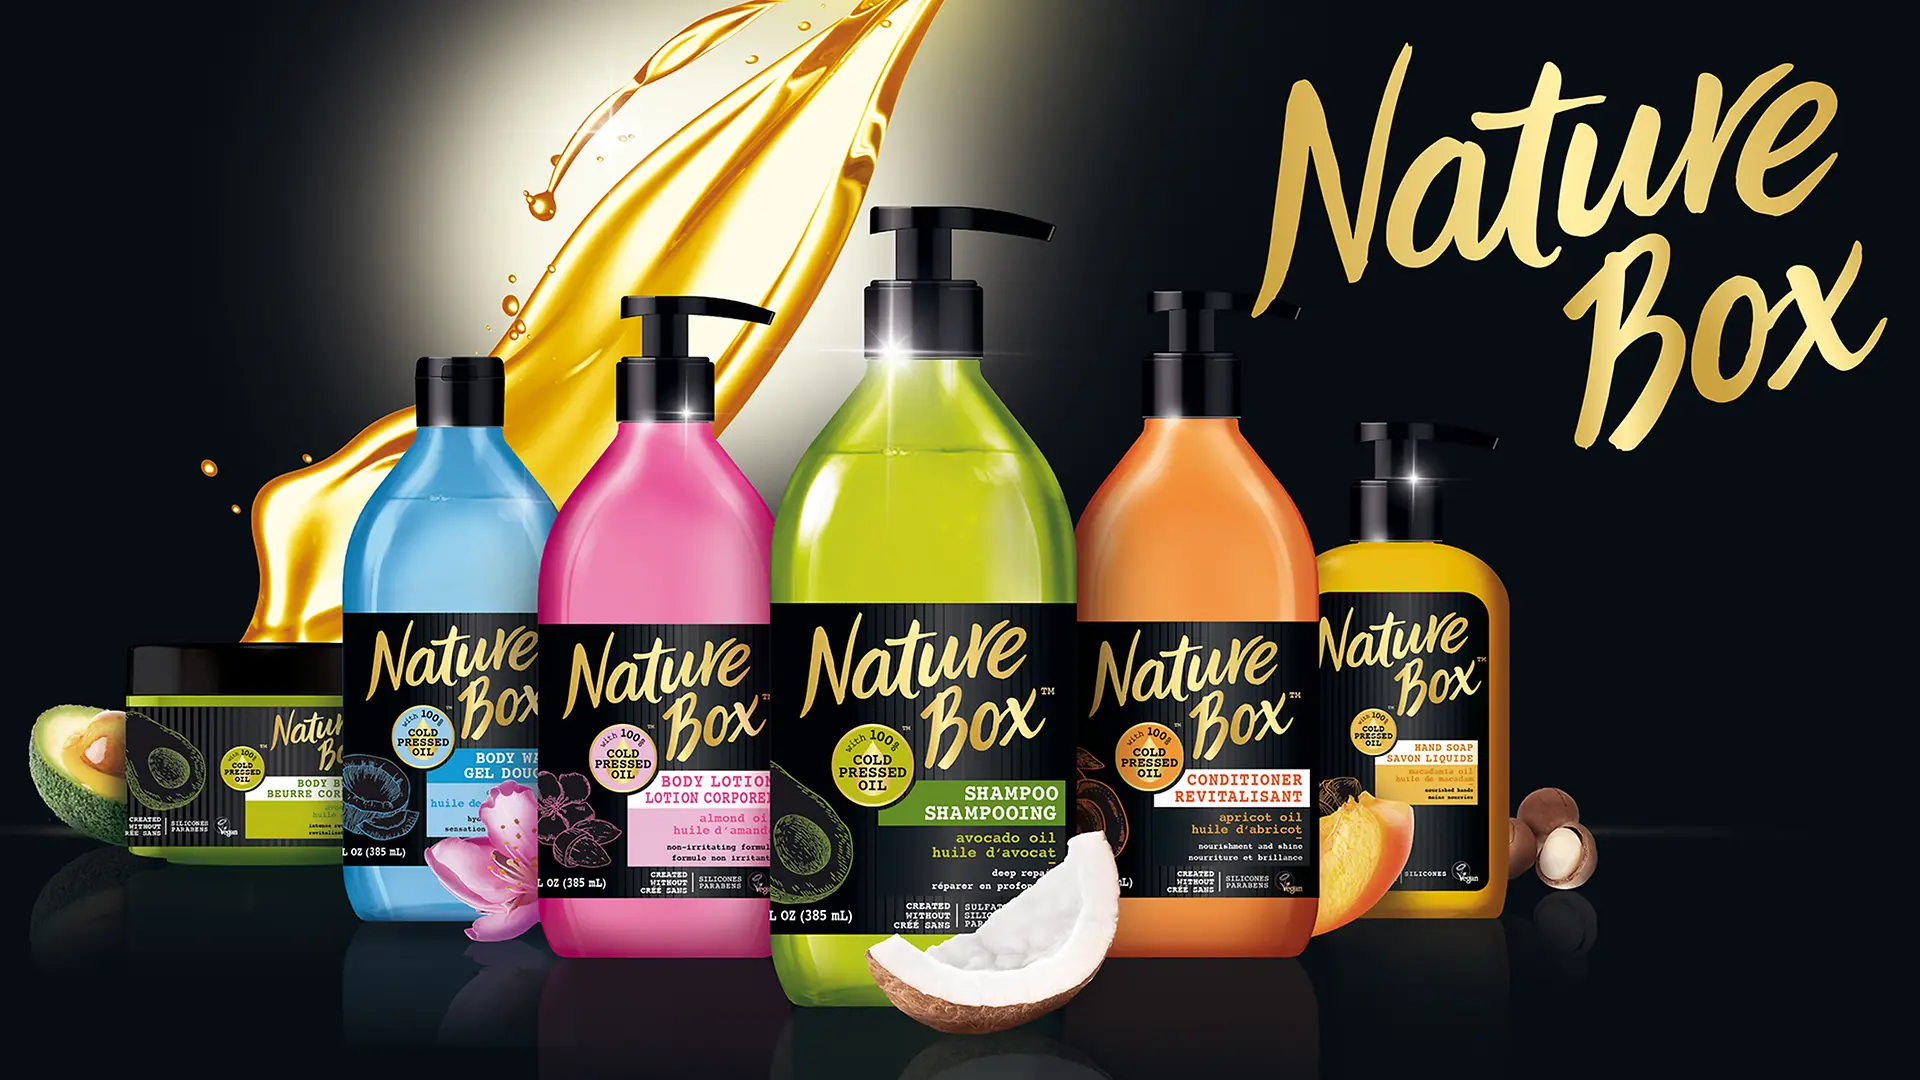 Nature Box products are made with 100% cold pressed oil from avocados, coconuts, apricots, almonds, and macadamia nuts.